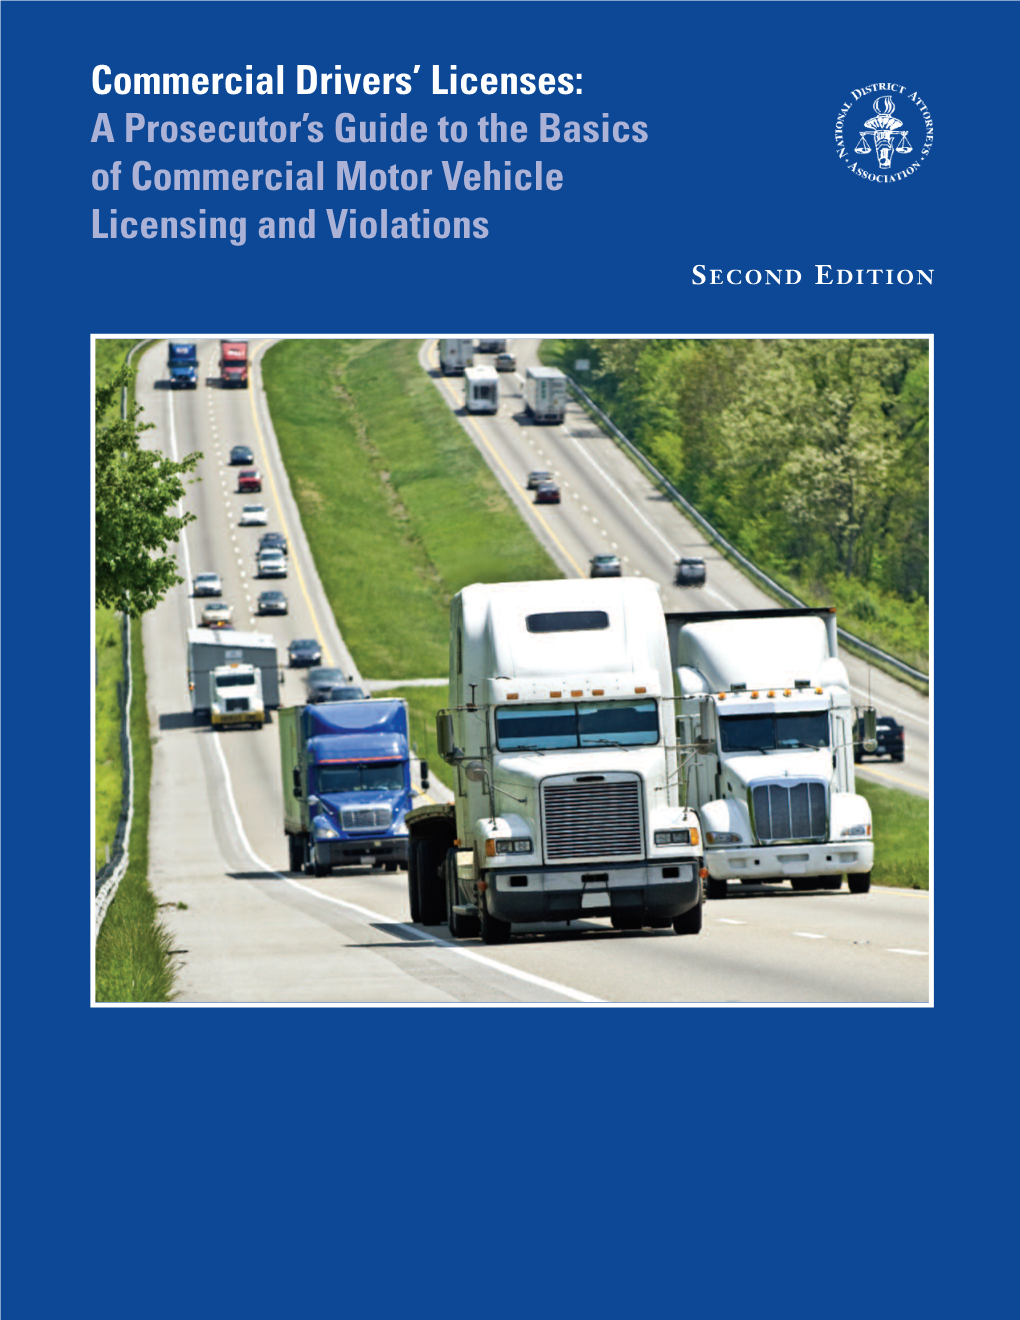 A Prosecutor's Guide to the Basics of Commercial Motor Vehicle